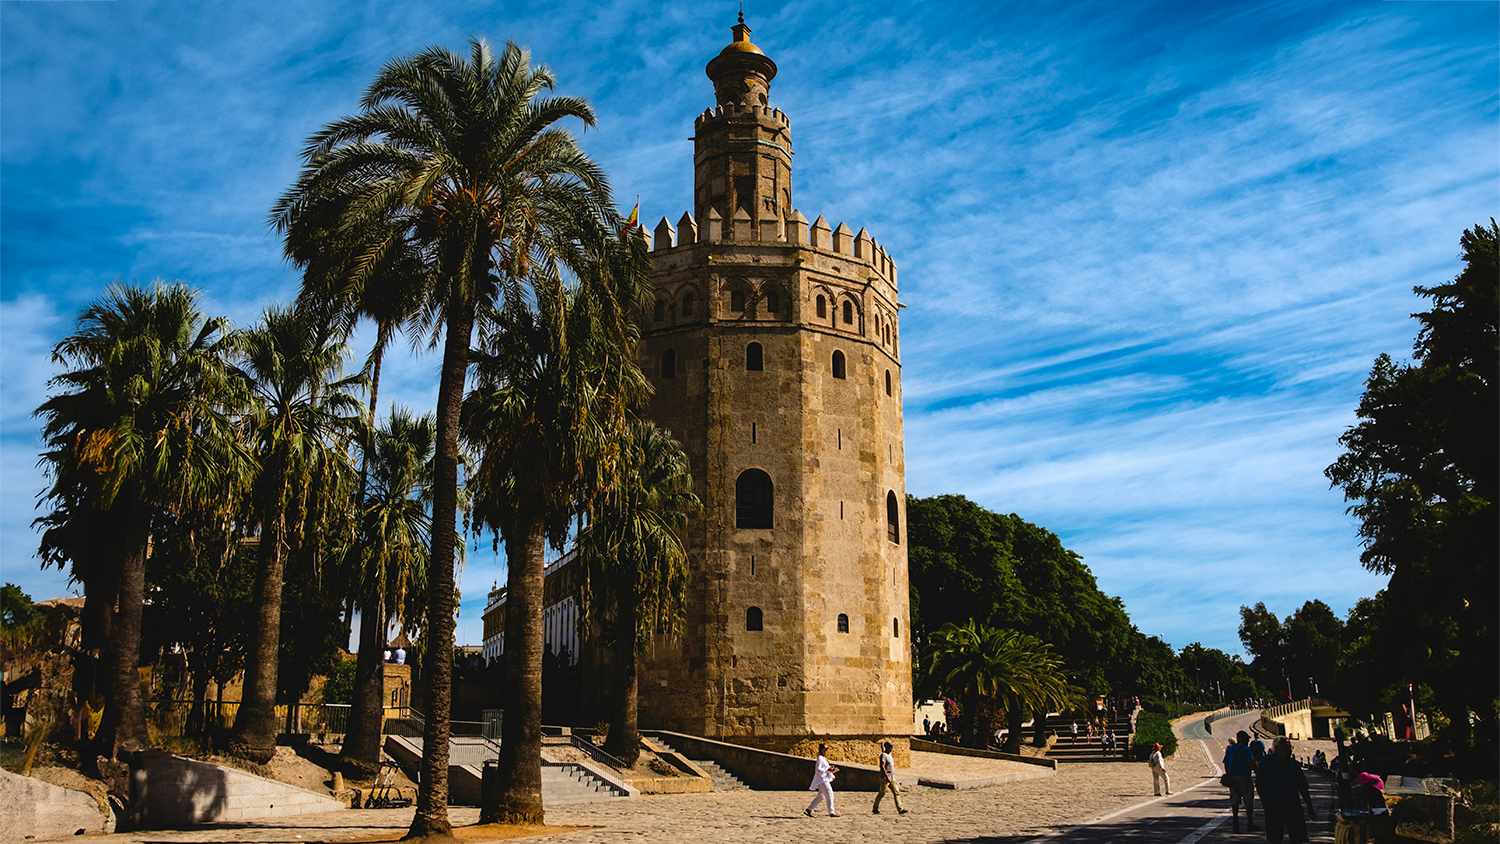 Torre del Oro - a dodecagonal military watchtower in Seville, southern Spain.